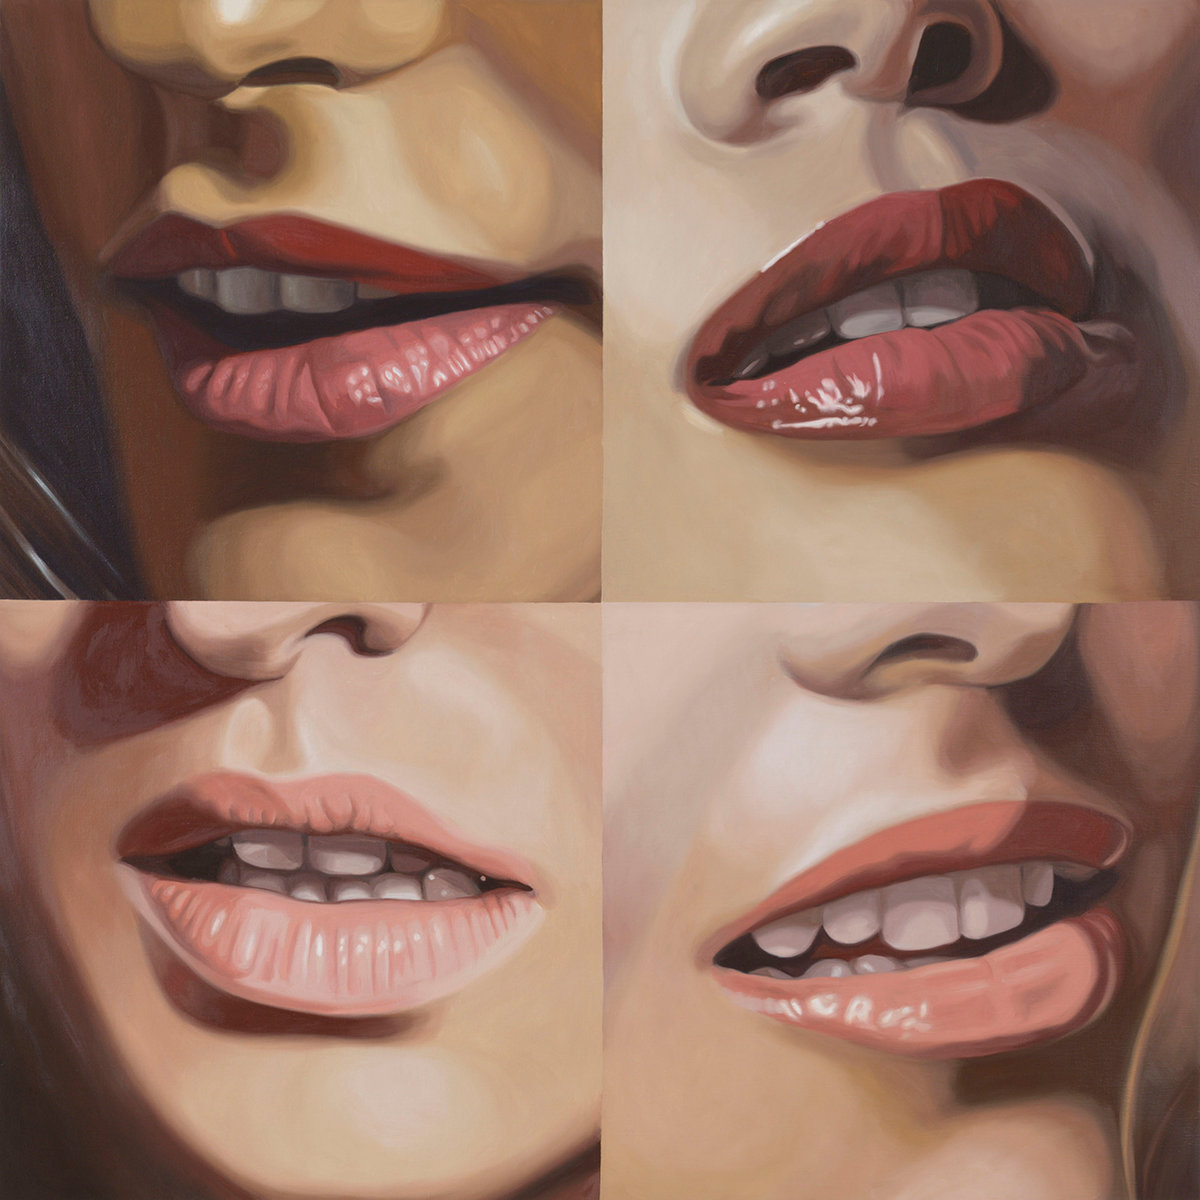 “The Mouths of Four Gorgons” by Julia Jacquette